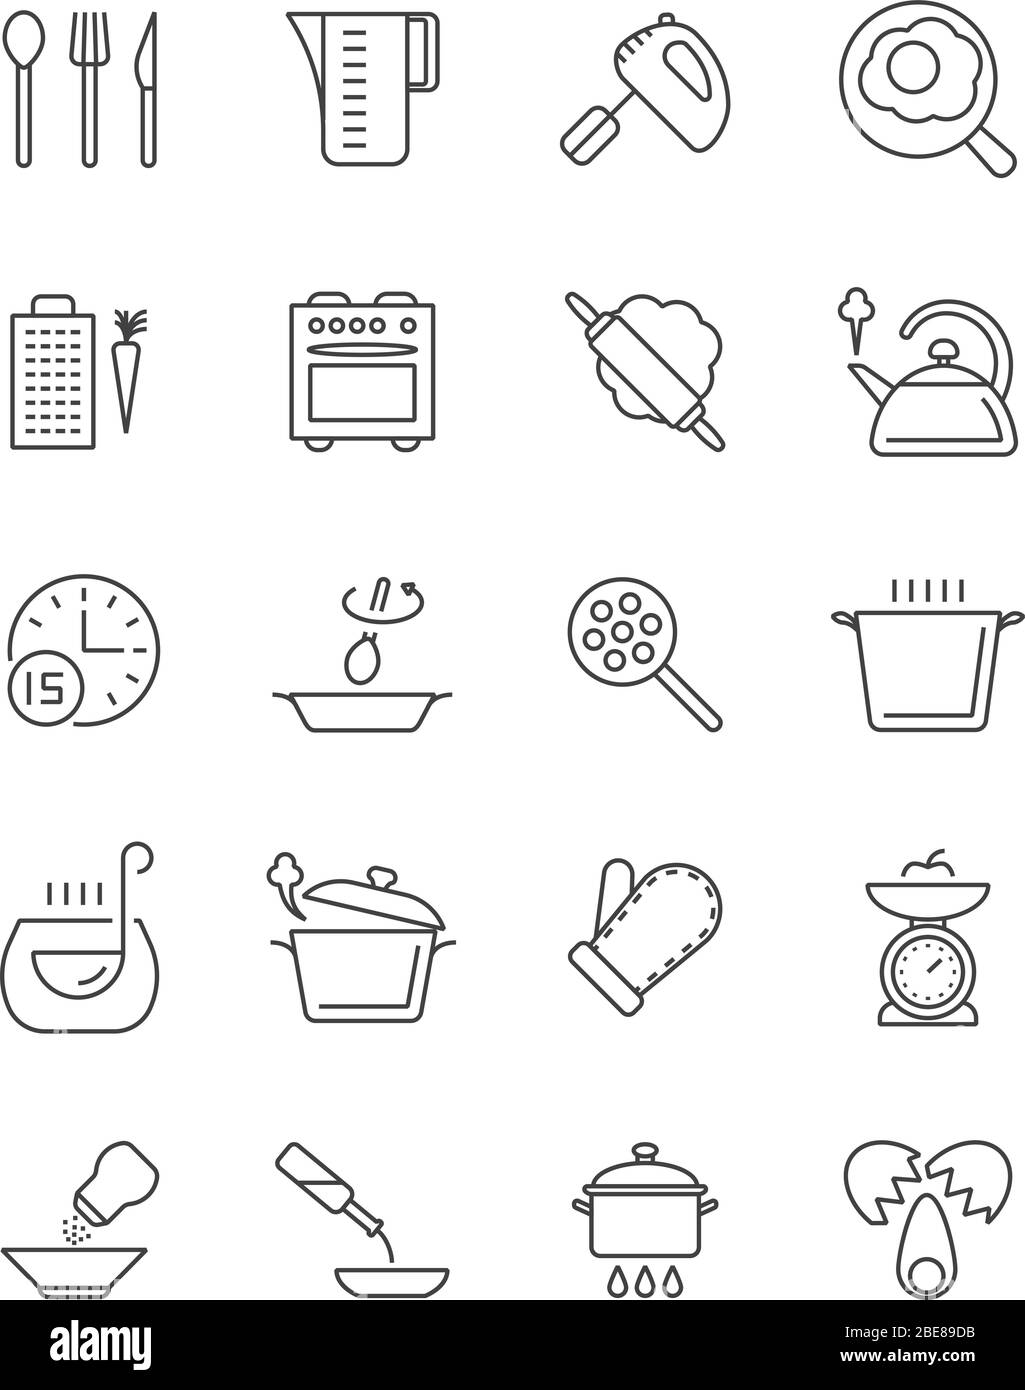 https://c8.alamy.com/comp/2BE89DB/cooking-food-preparation-and-kitchen-tools-vector-icons-kitchen-utensil-and-cooking-tool-spoon-and-fork-illustration-2BE89DB.jpg